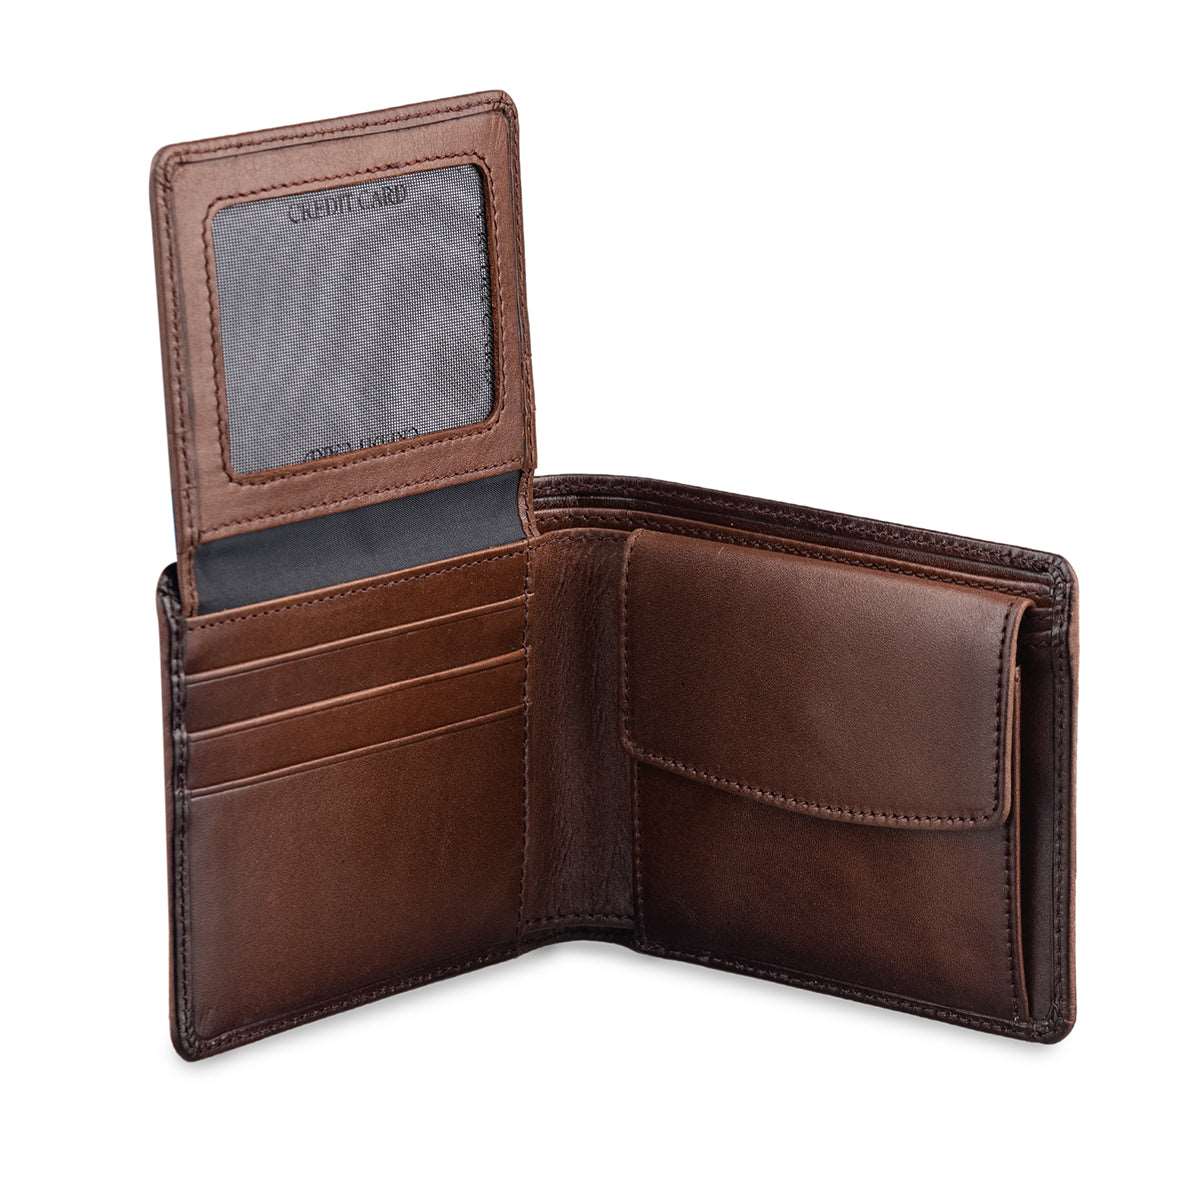 Buy Luxury Leather Wallets for Men Online at 10% Off